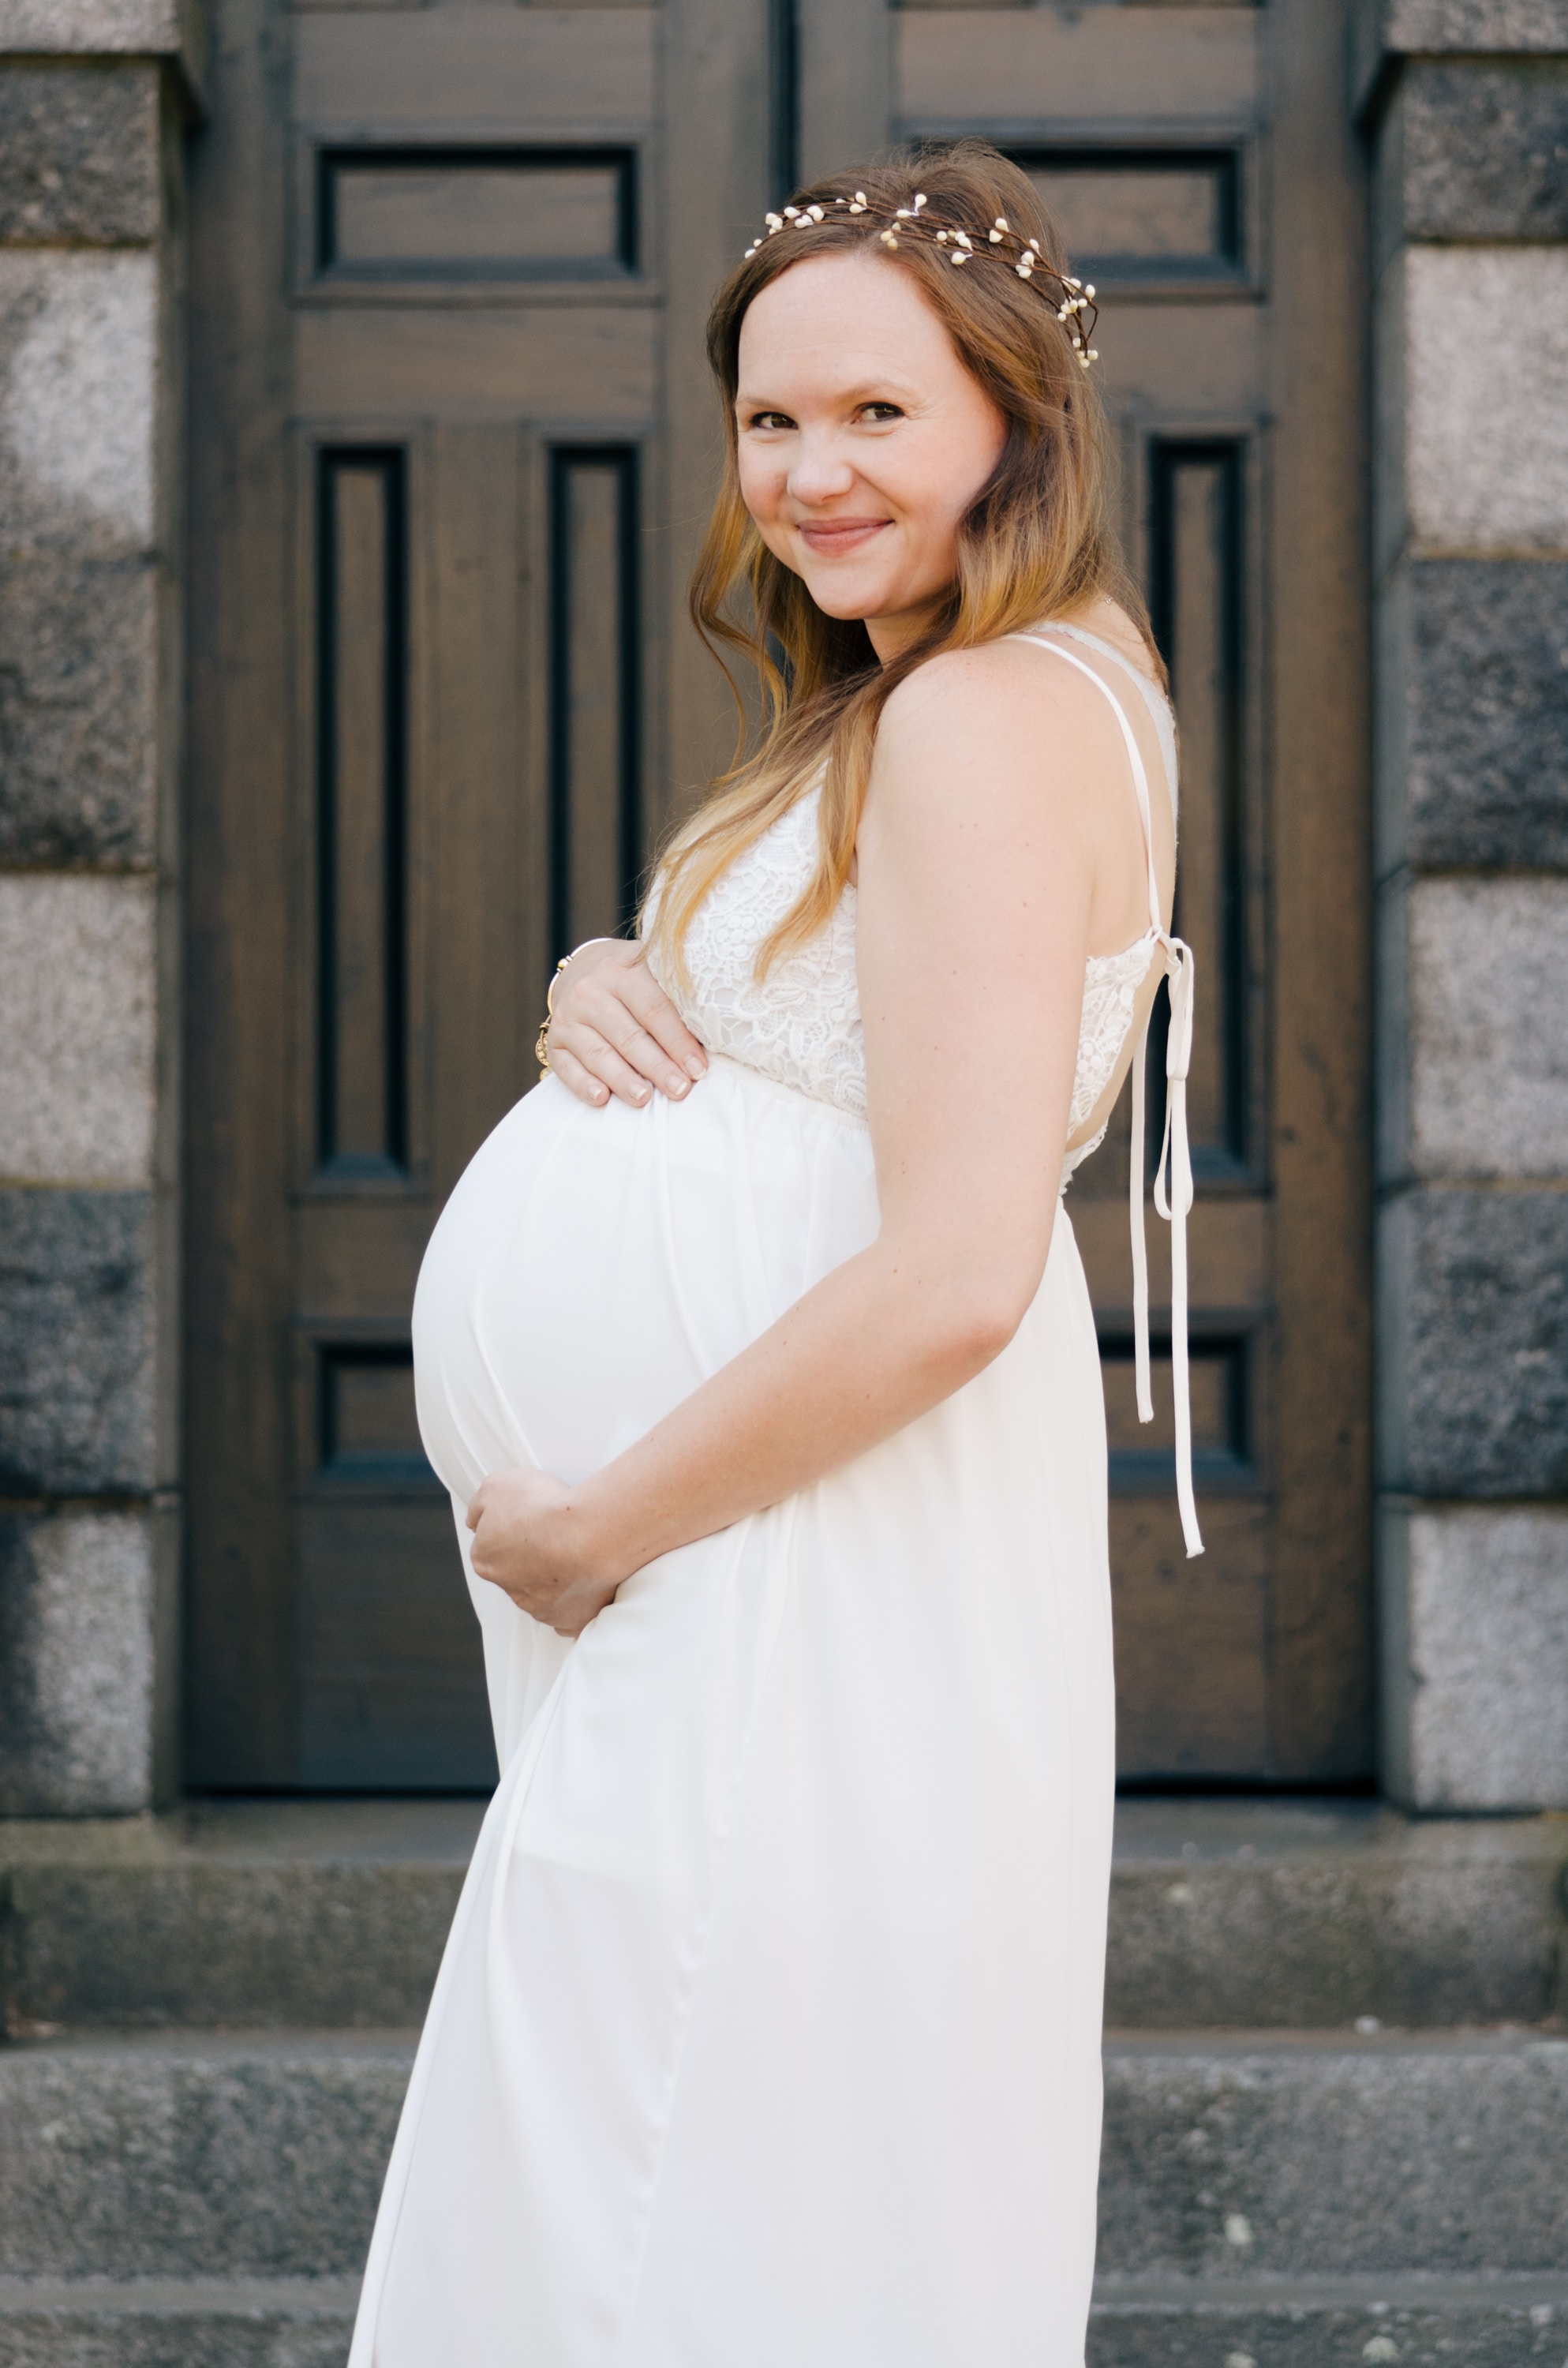 A happy pregnant woman holds her baby bump | Source: Unsplash